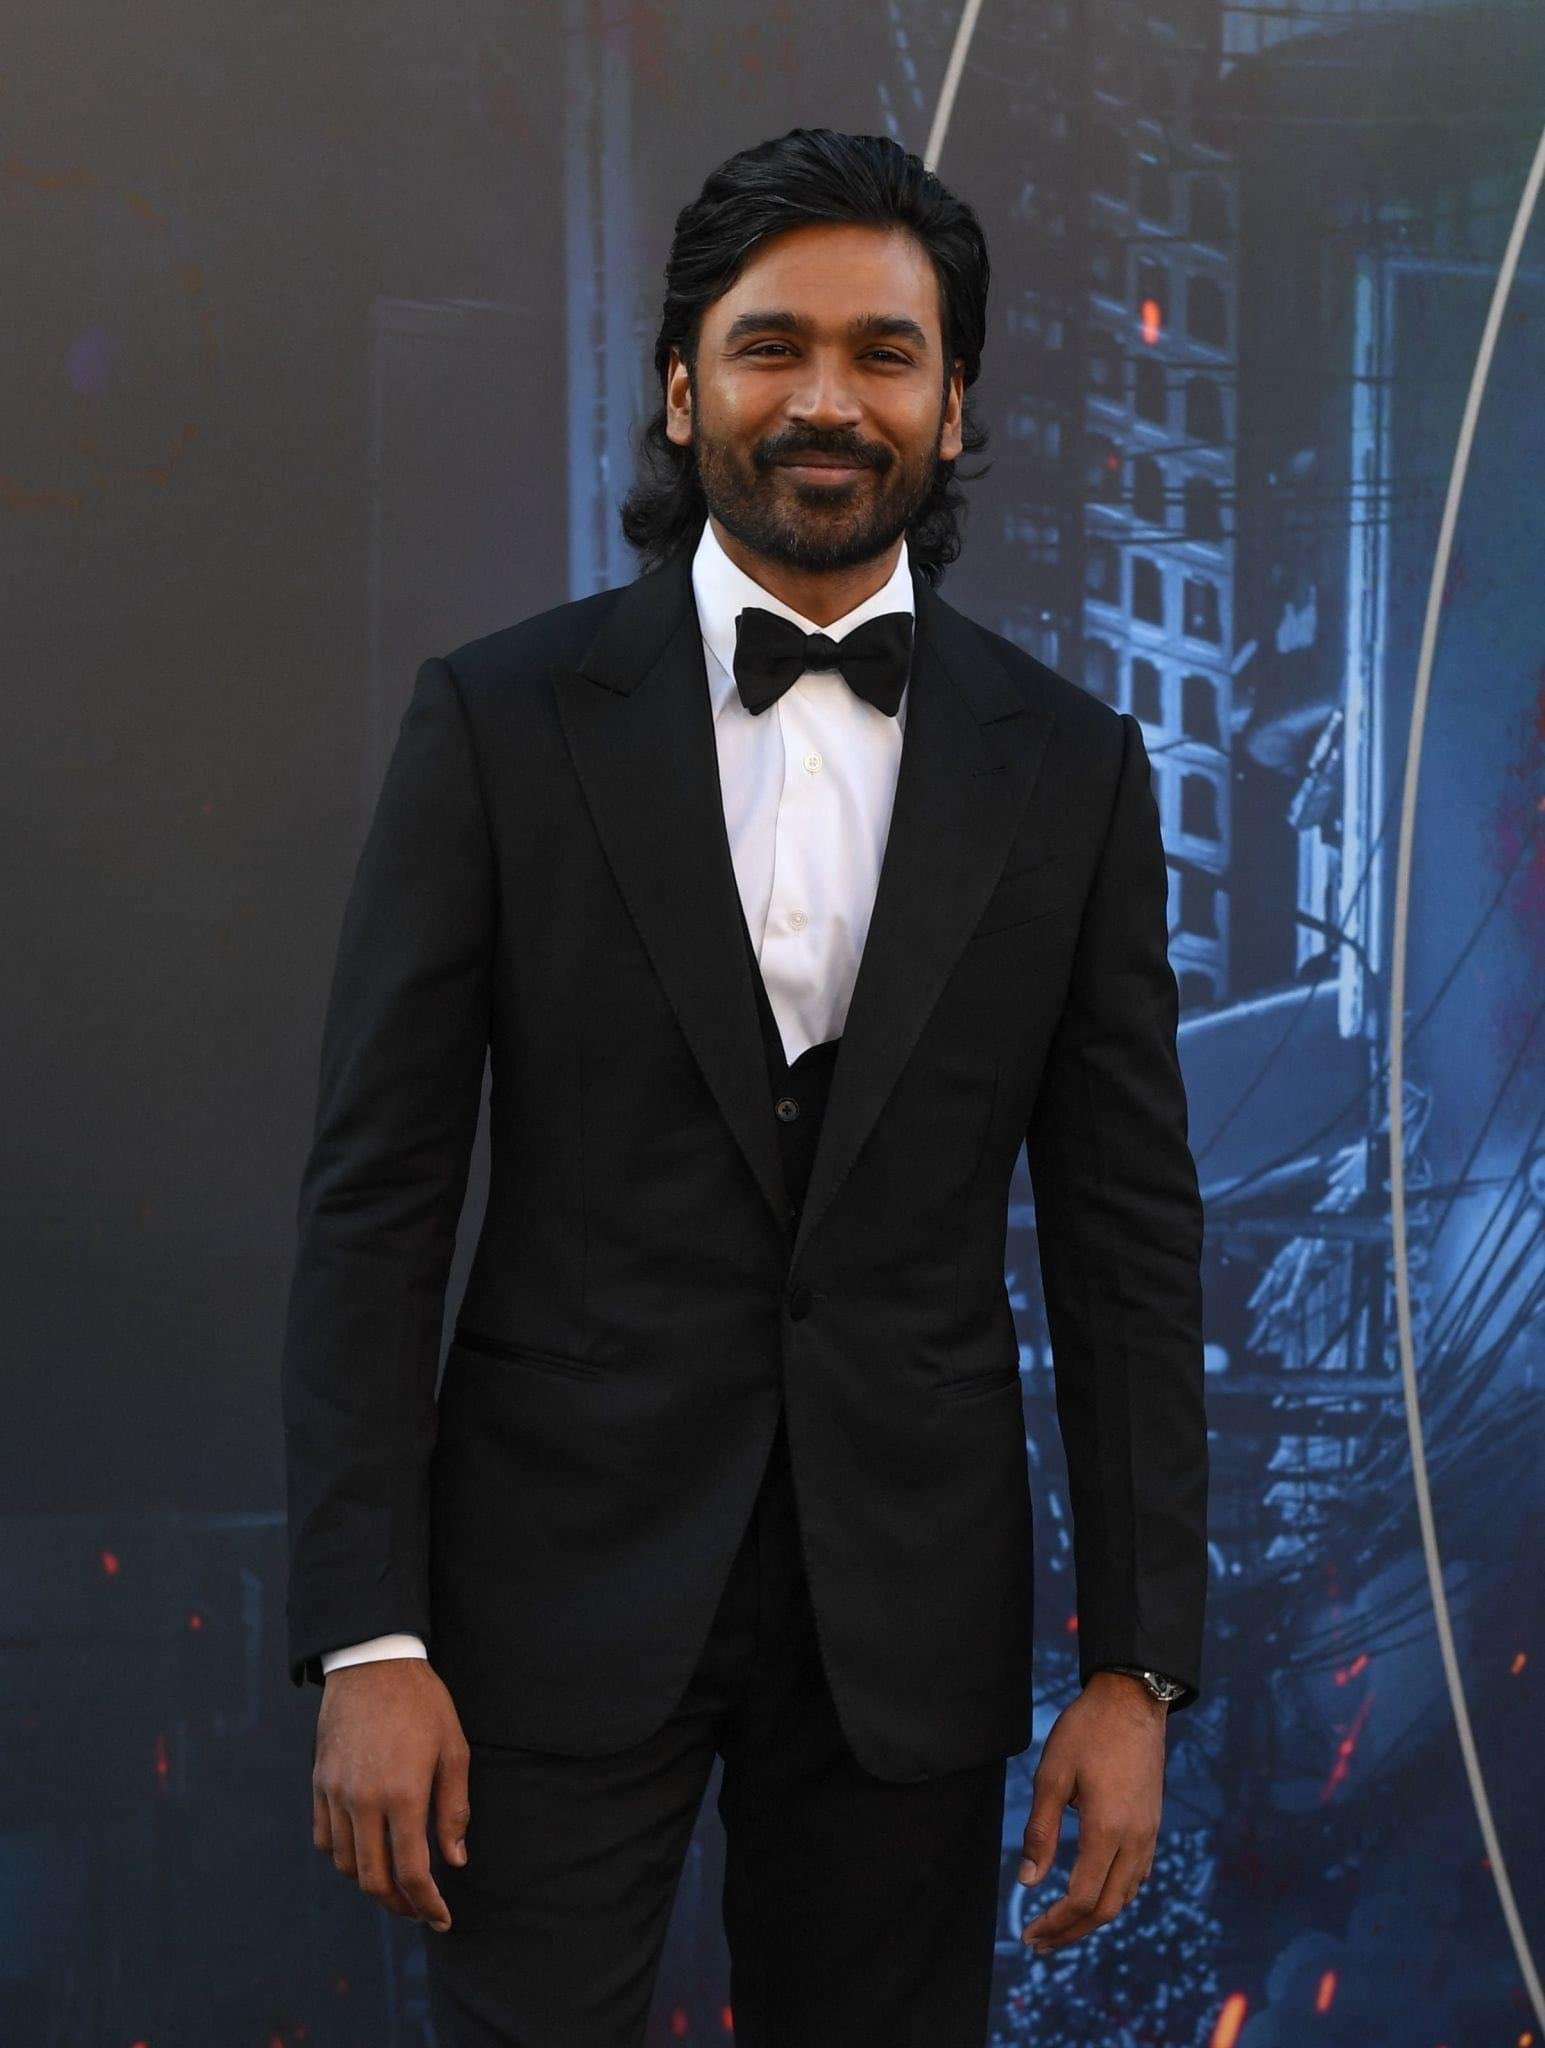 Dhanush attends The Gray Man premiere with sons Linga, Yathra. See